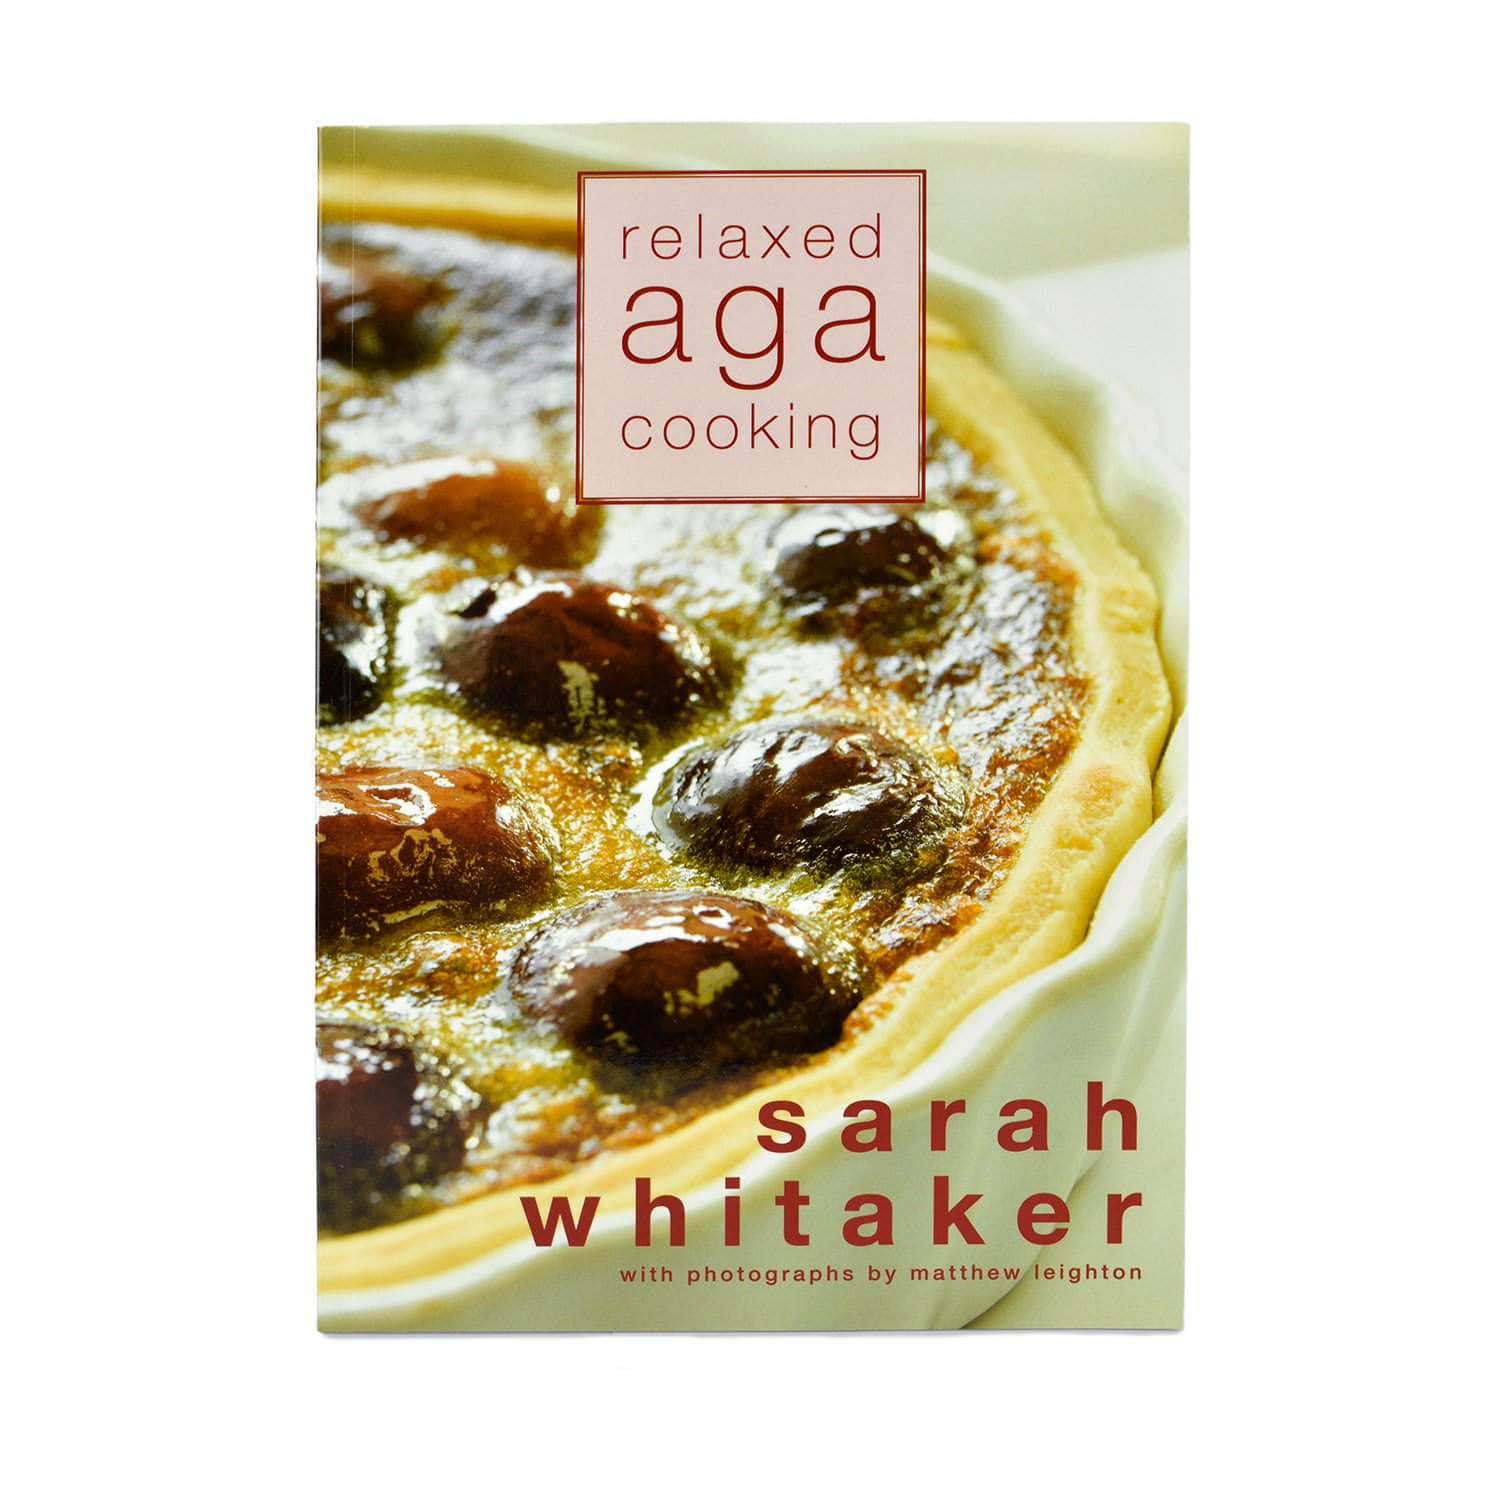 'Relaxed Aga cooking' - cookbook by Sarah Whitaker